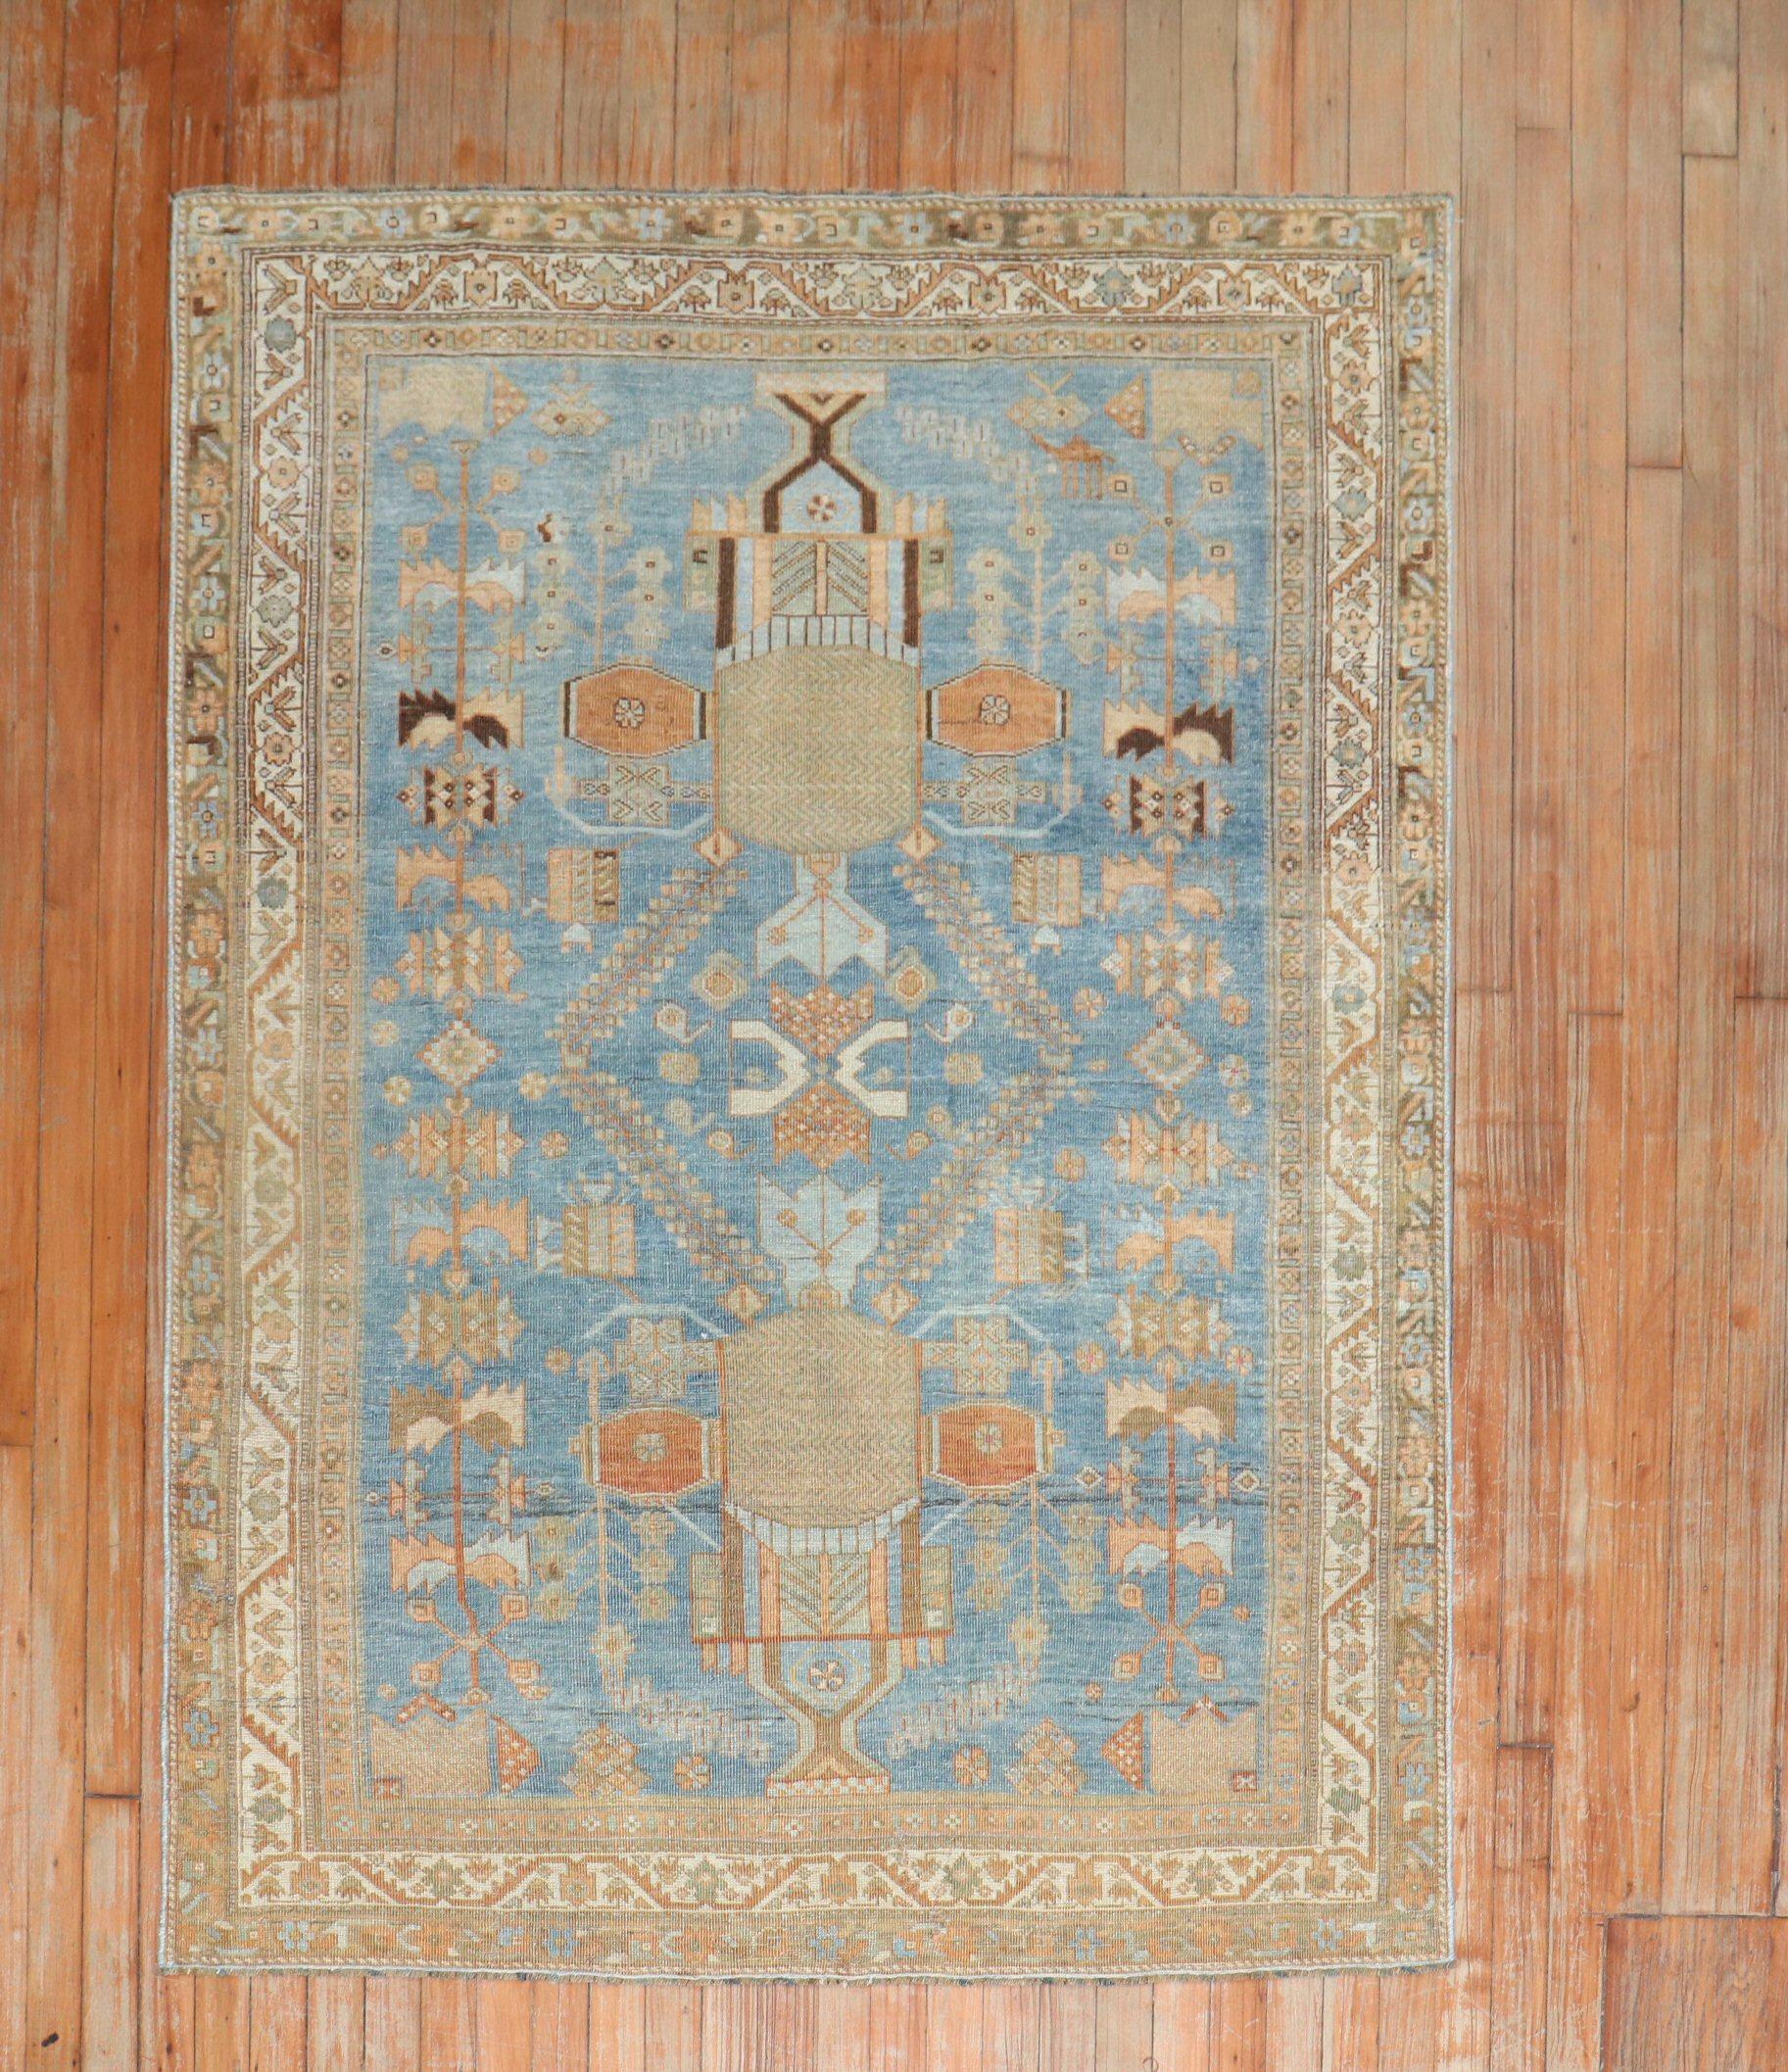 Persian Tribal  small size Rug from the 2nd quarter of the 20th century

size	4'4'' x 5'8